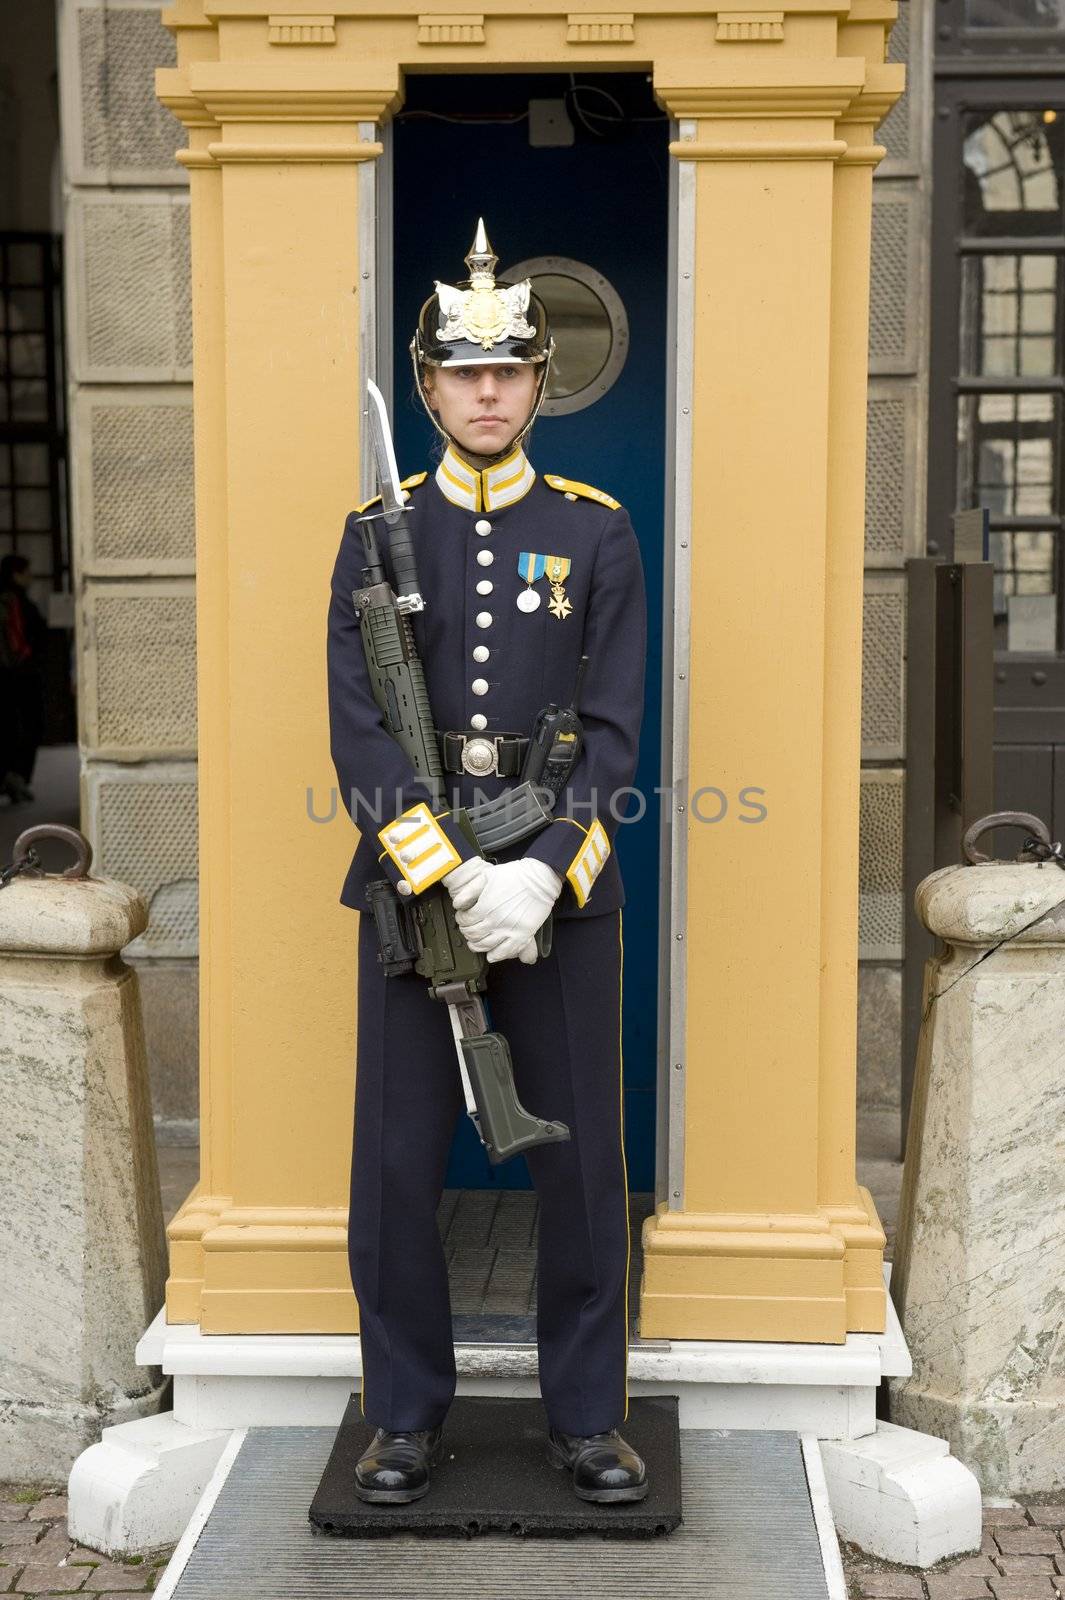 Sweden Royal guards by Alenmax